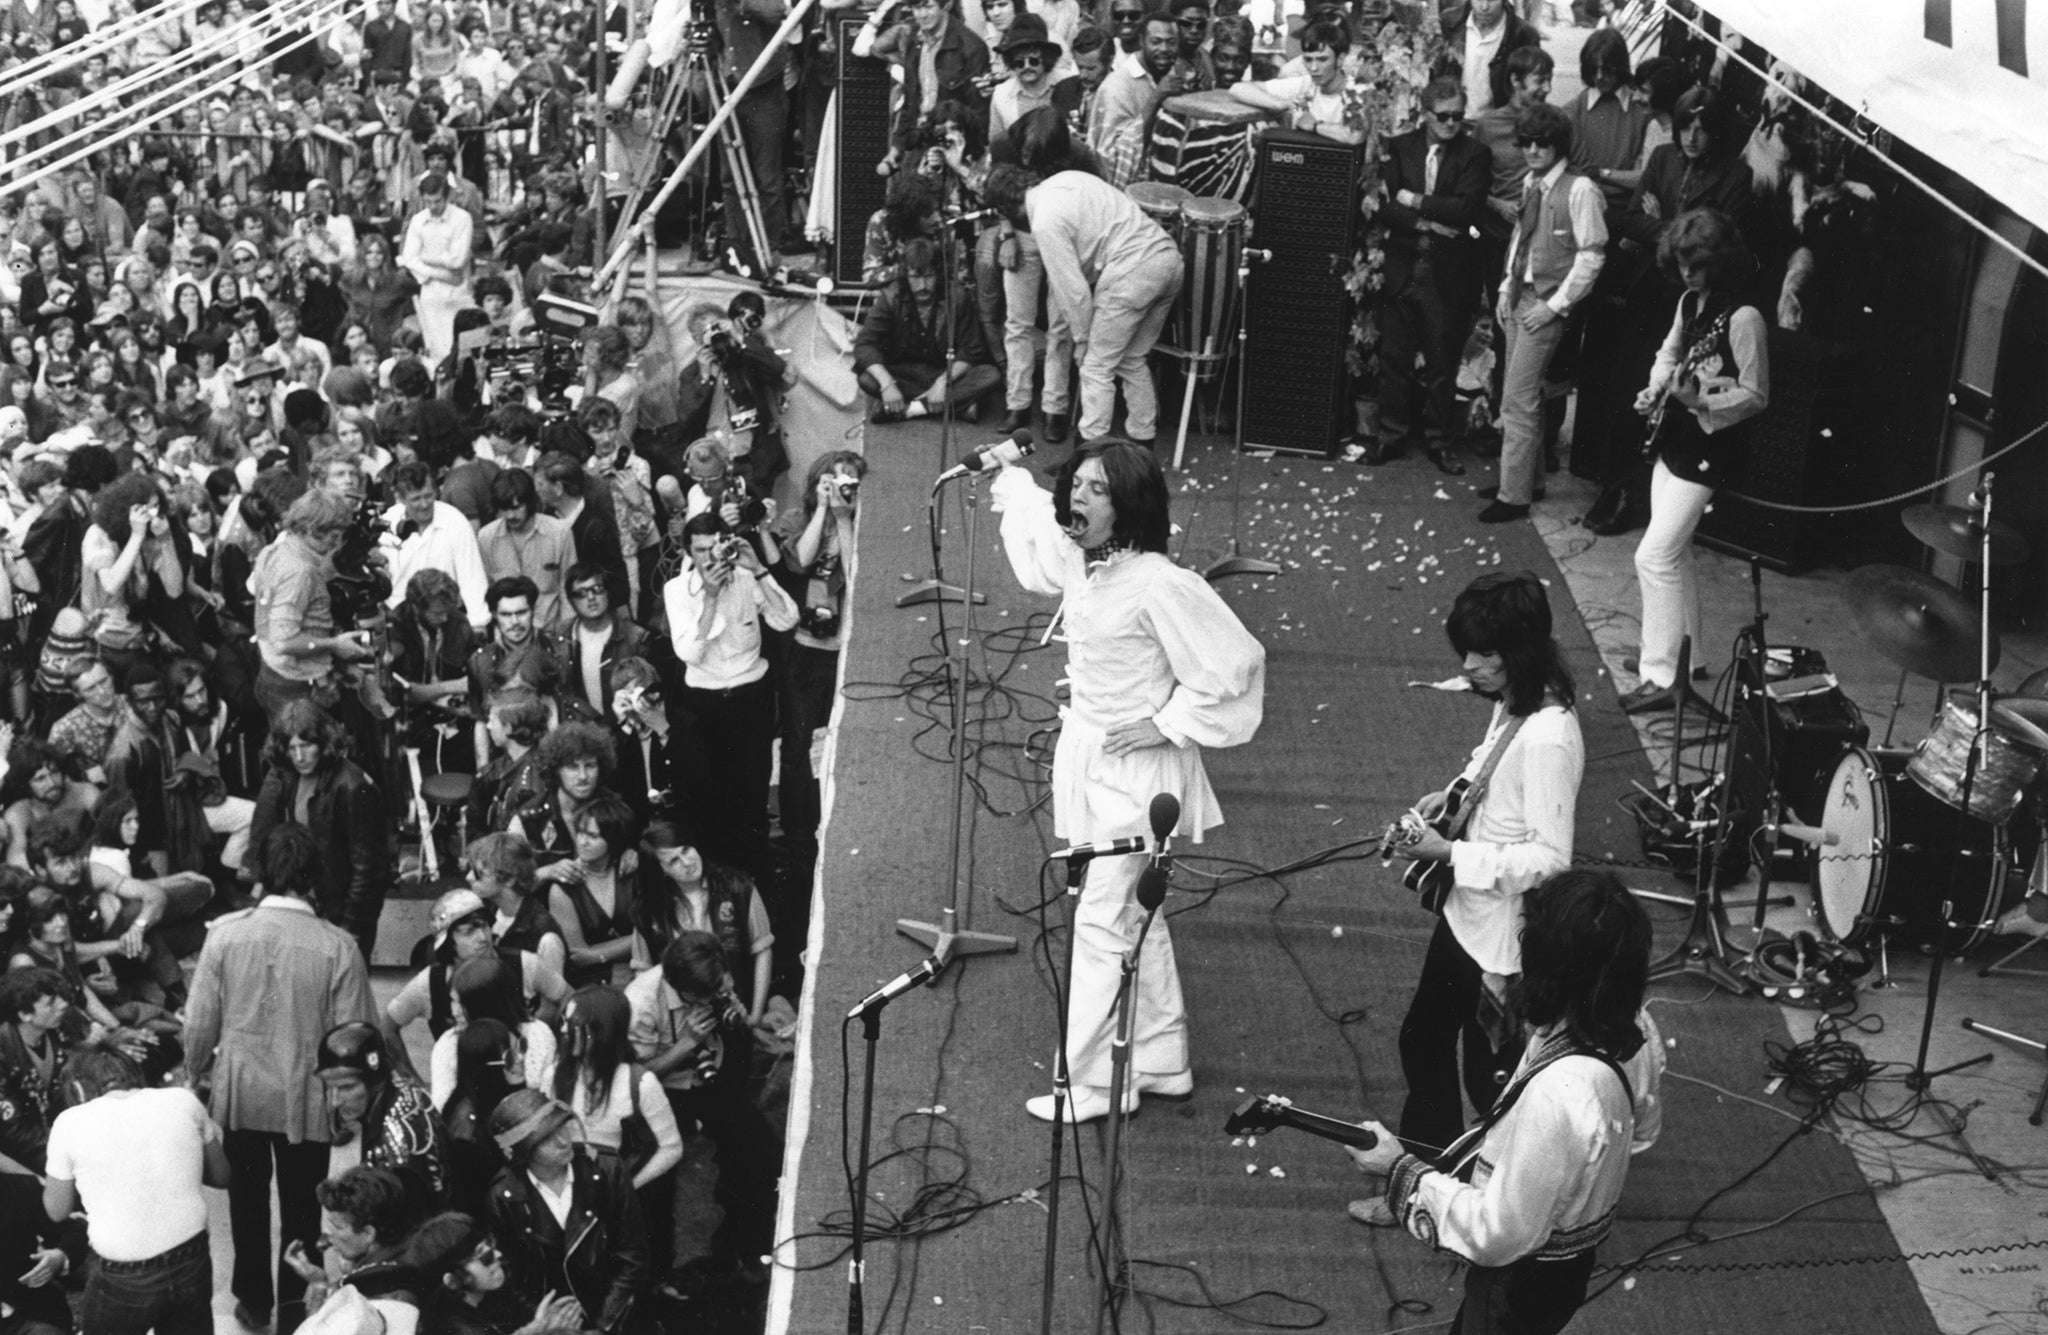 The Rolling Stones at a concert given in memory of guitarist Brian Jones two days after his death in 1969